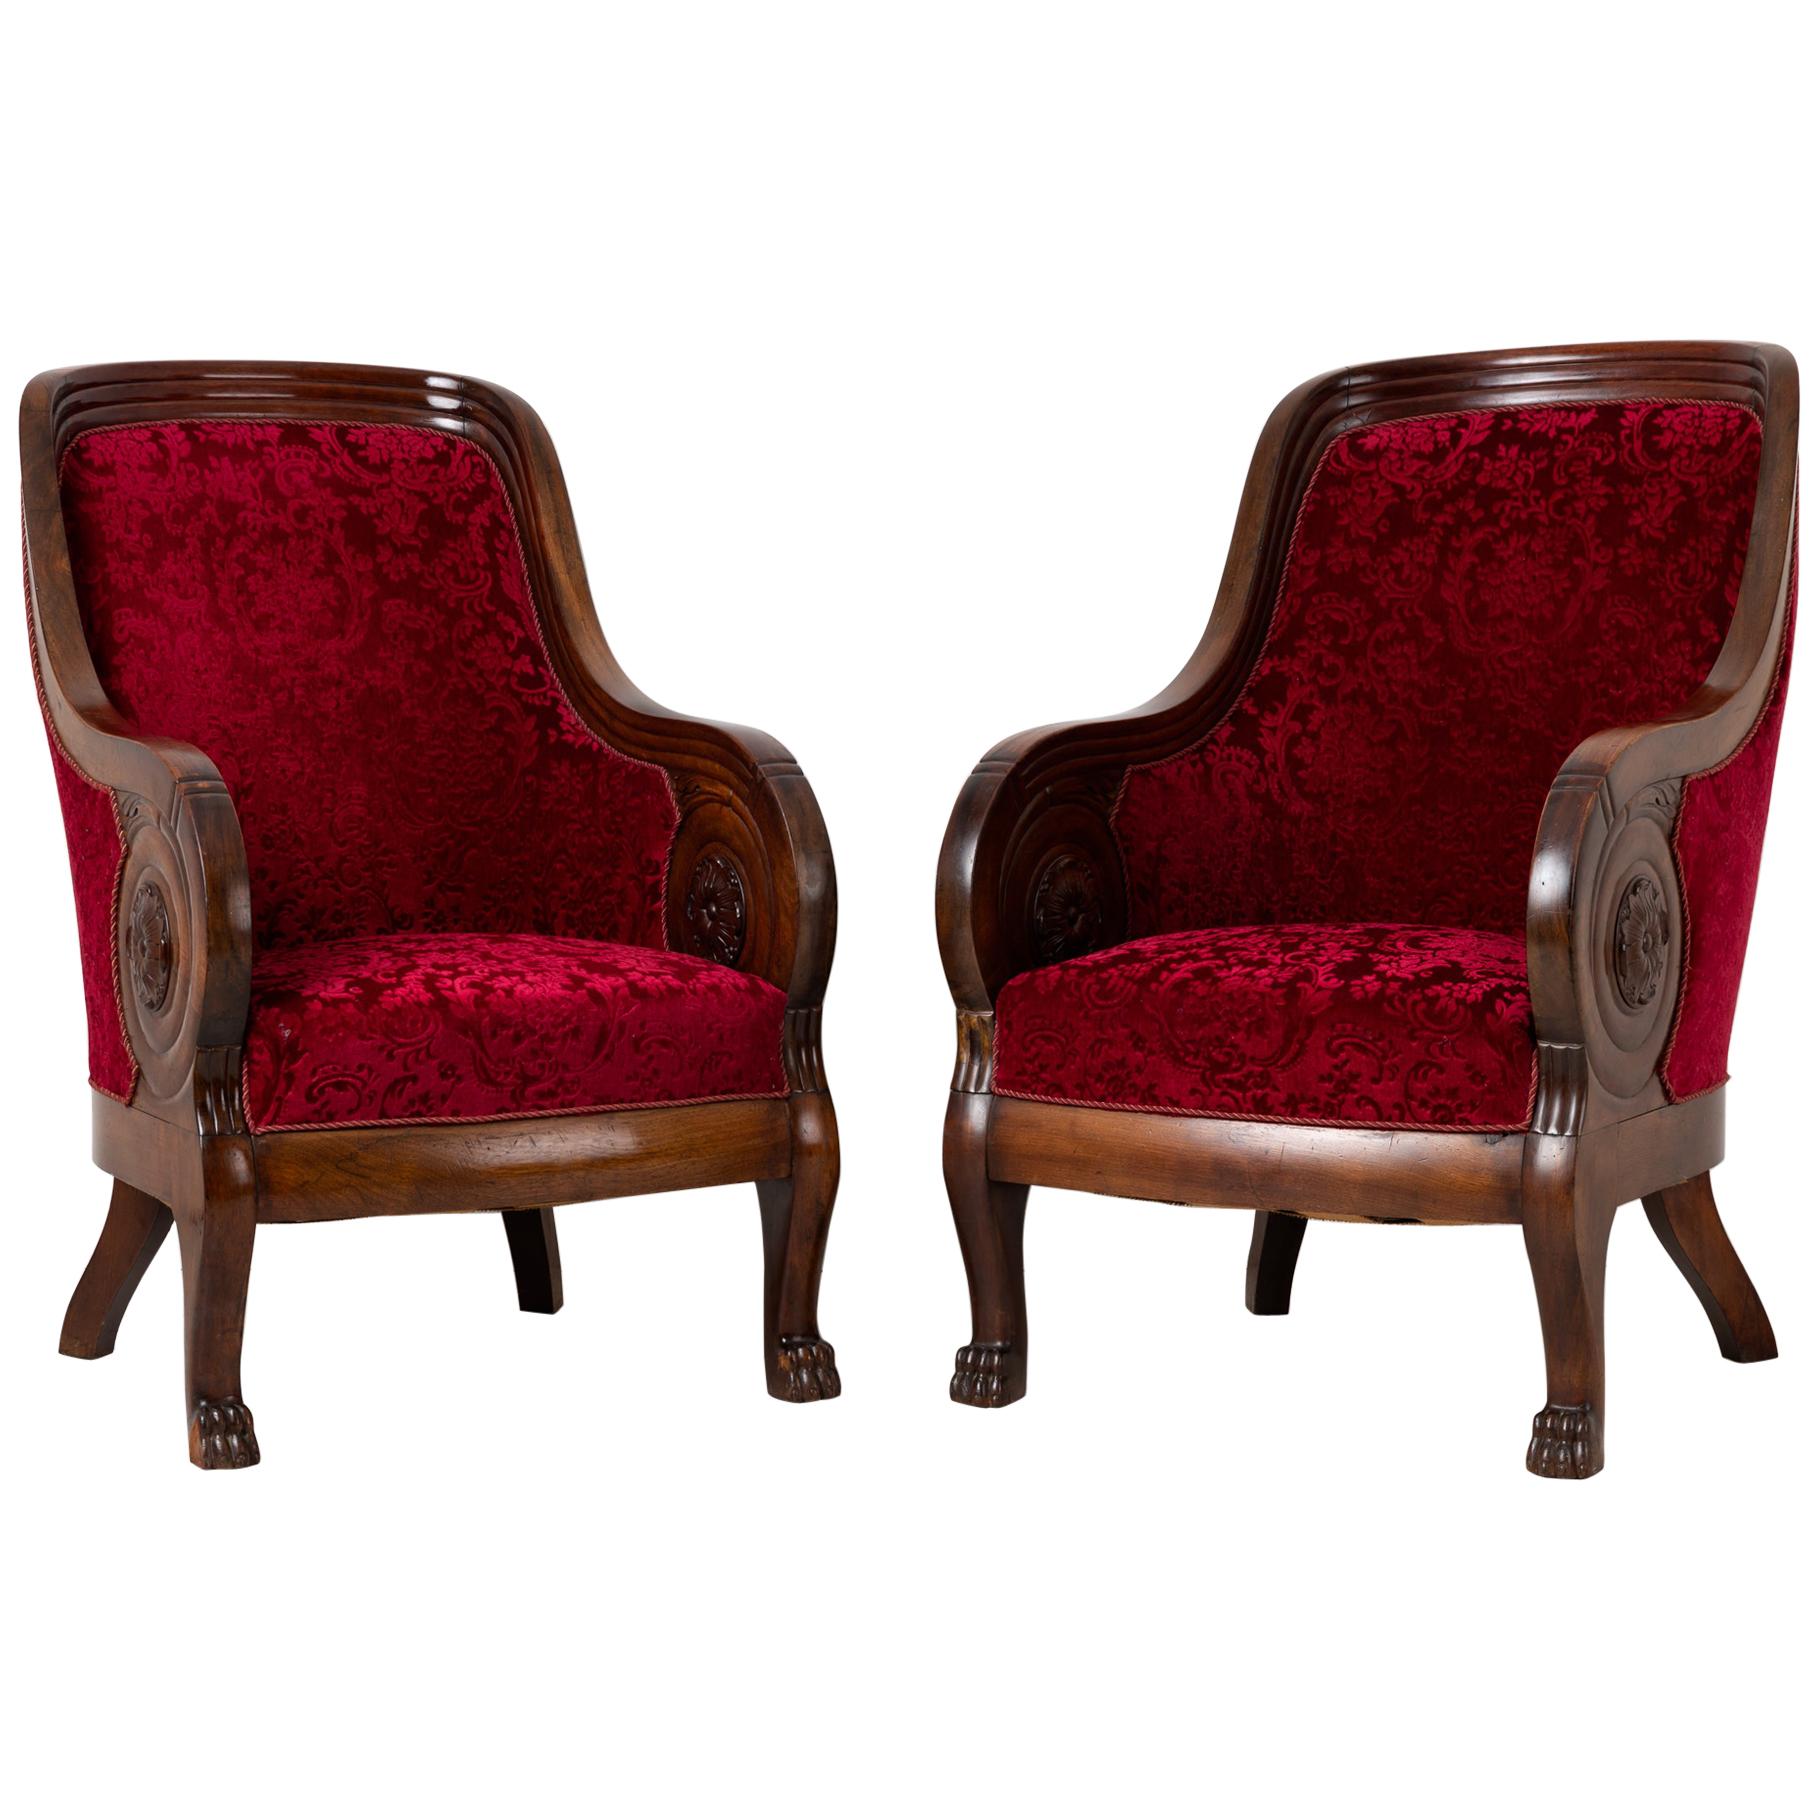 Mahogany and Red Velvet Armchairs in Empire Style